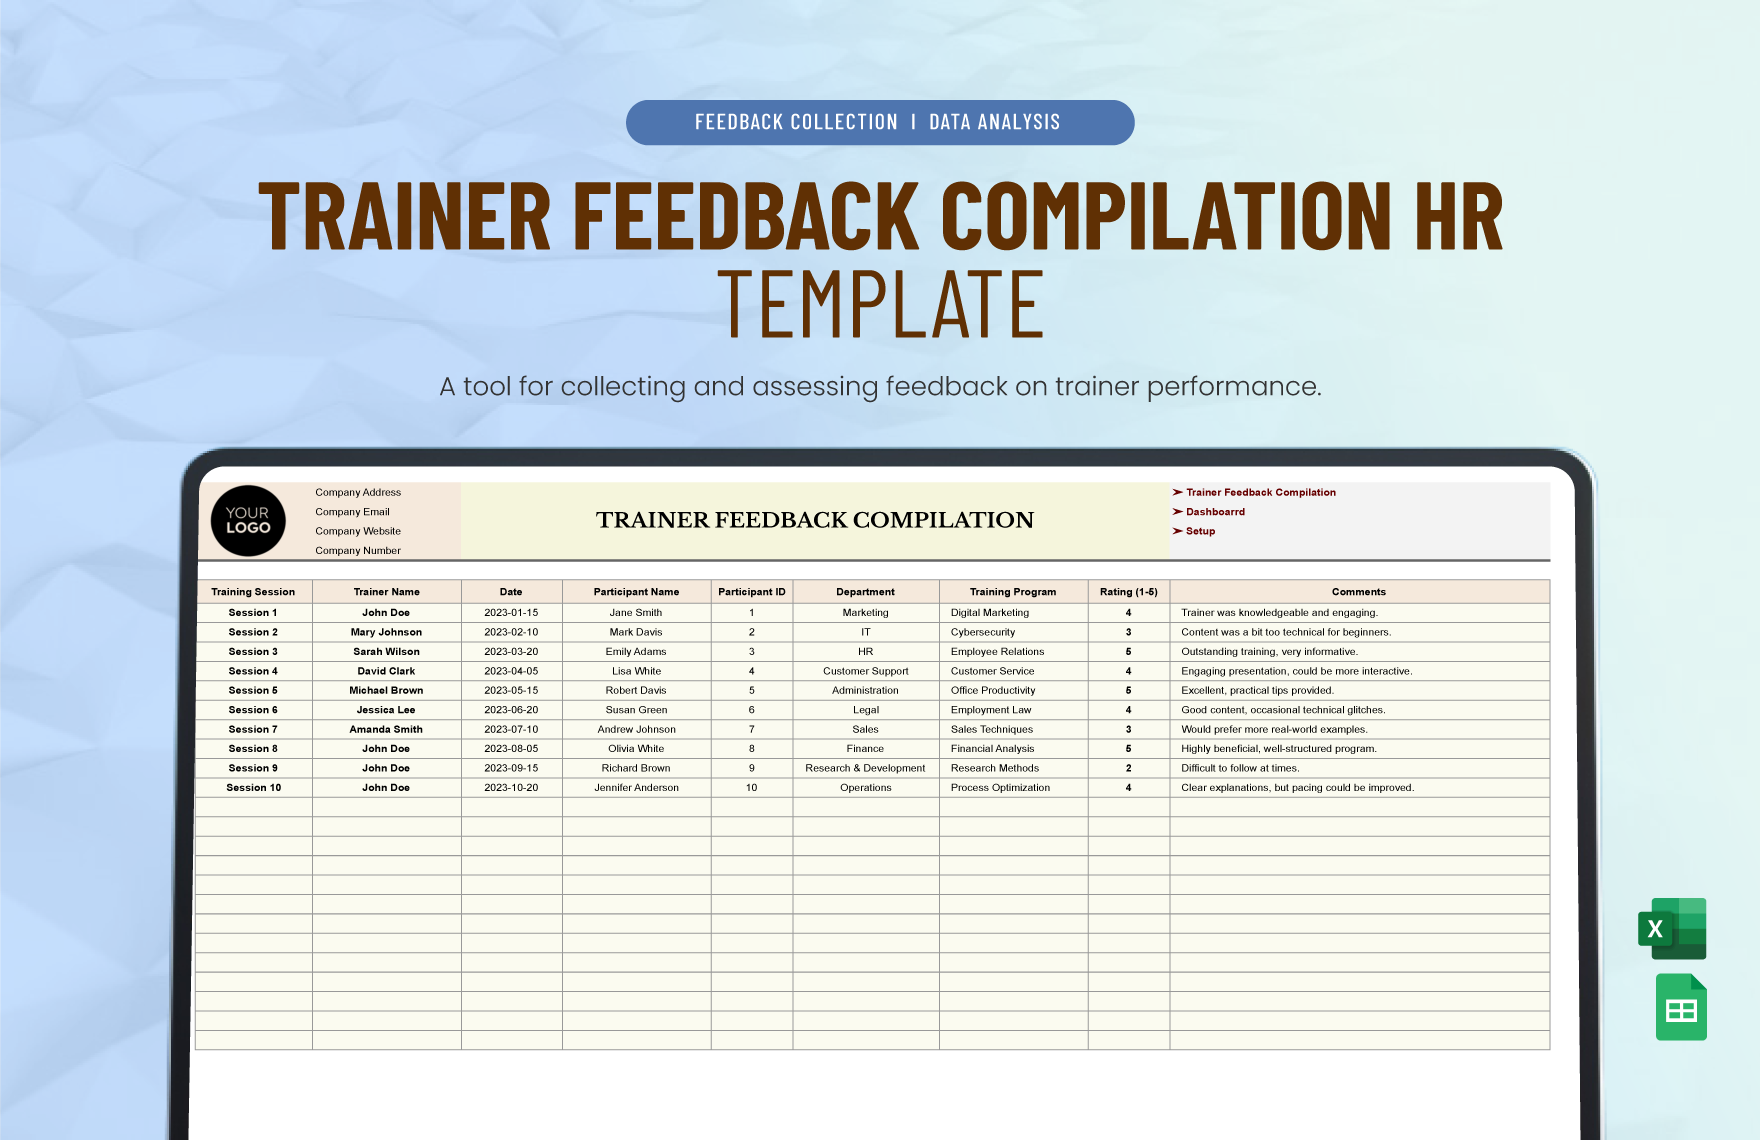 Trainer Feedback Compilation HR Template